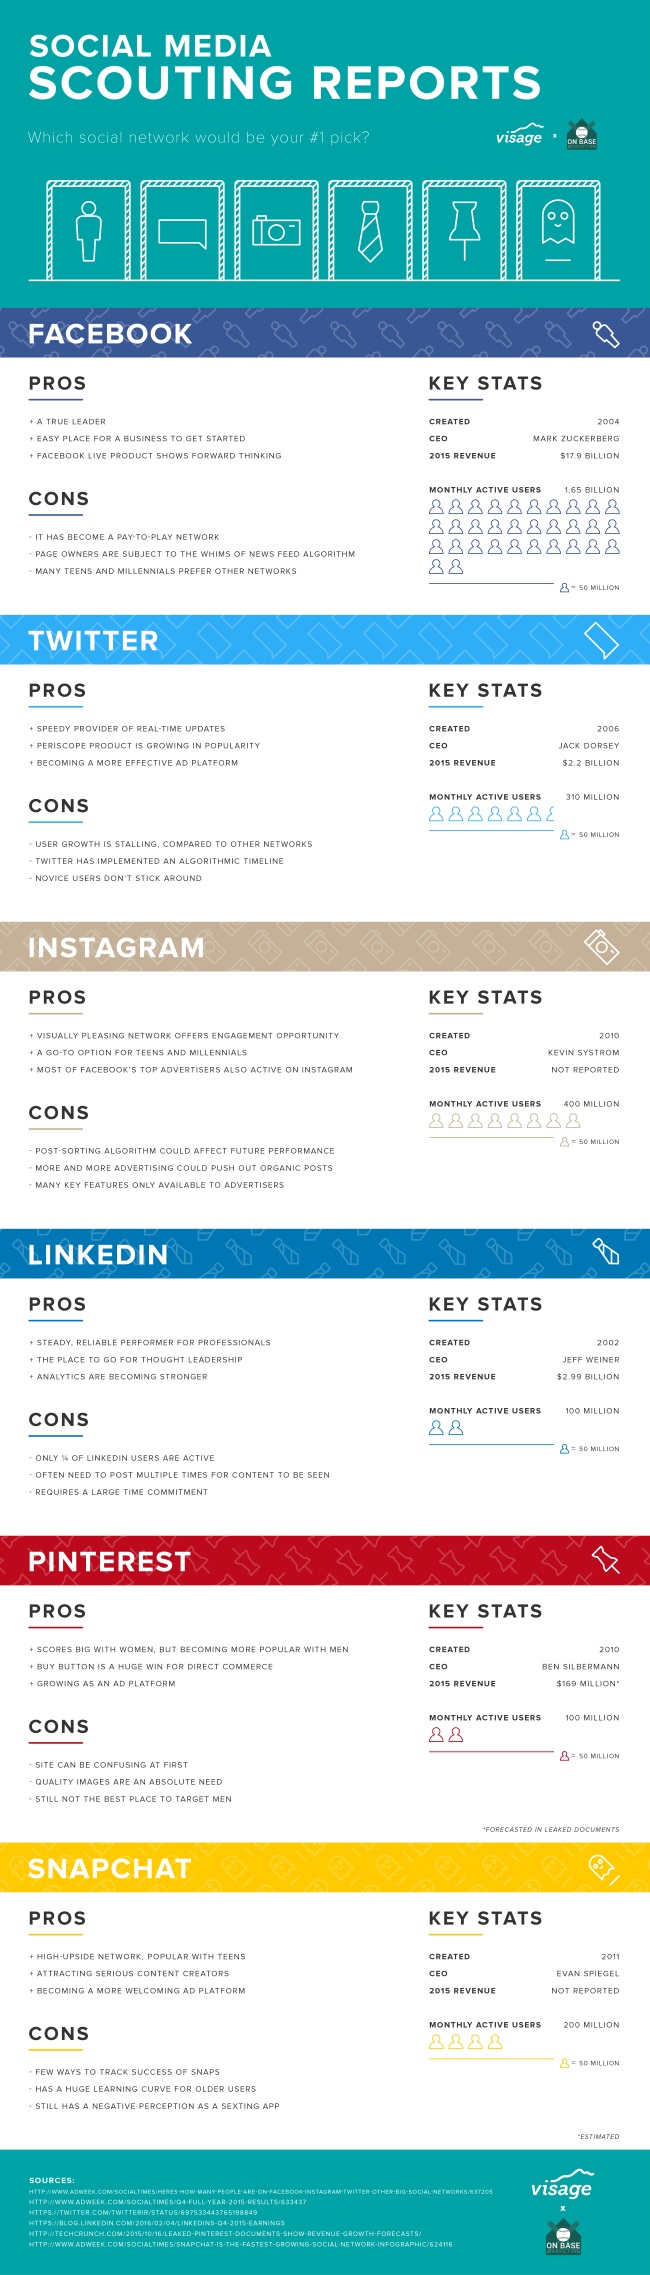 pros and cons of social media infographic